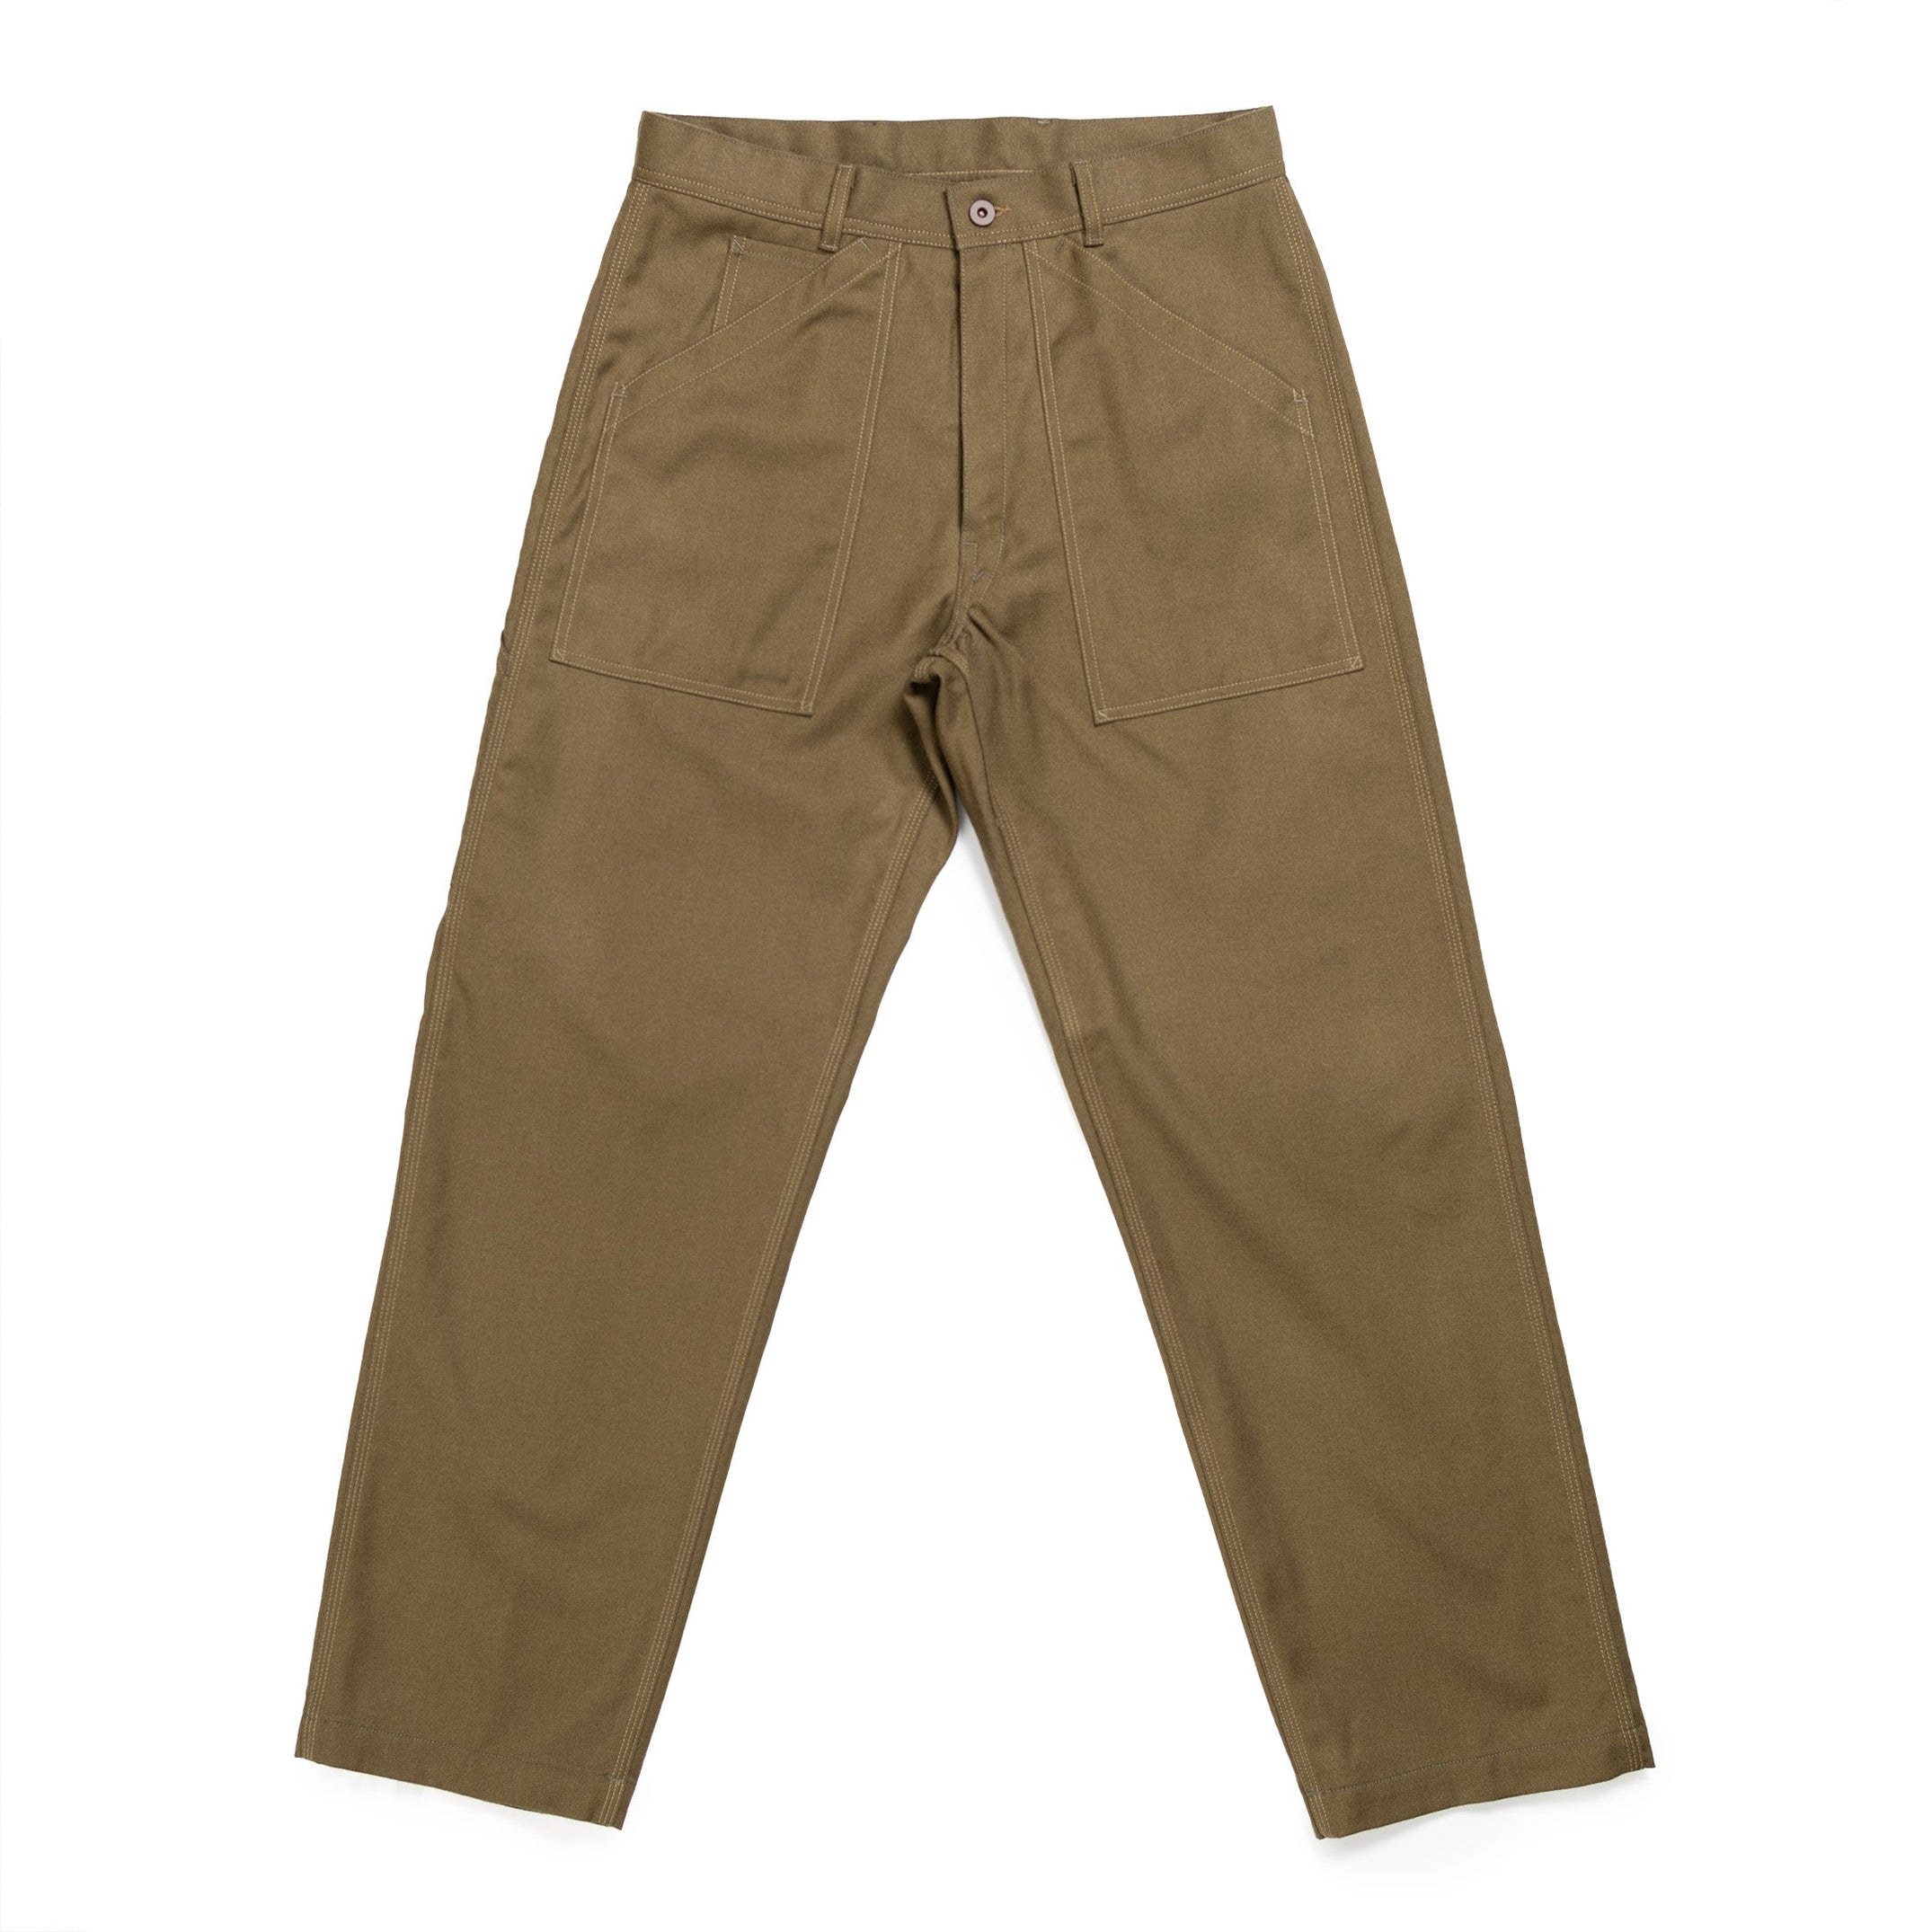 Coherence Paul Rover Wool Twill Trousers Olive – Clutch Cafe